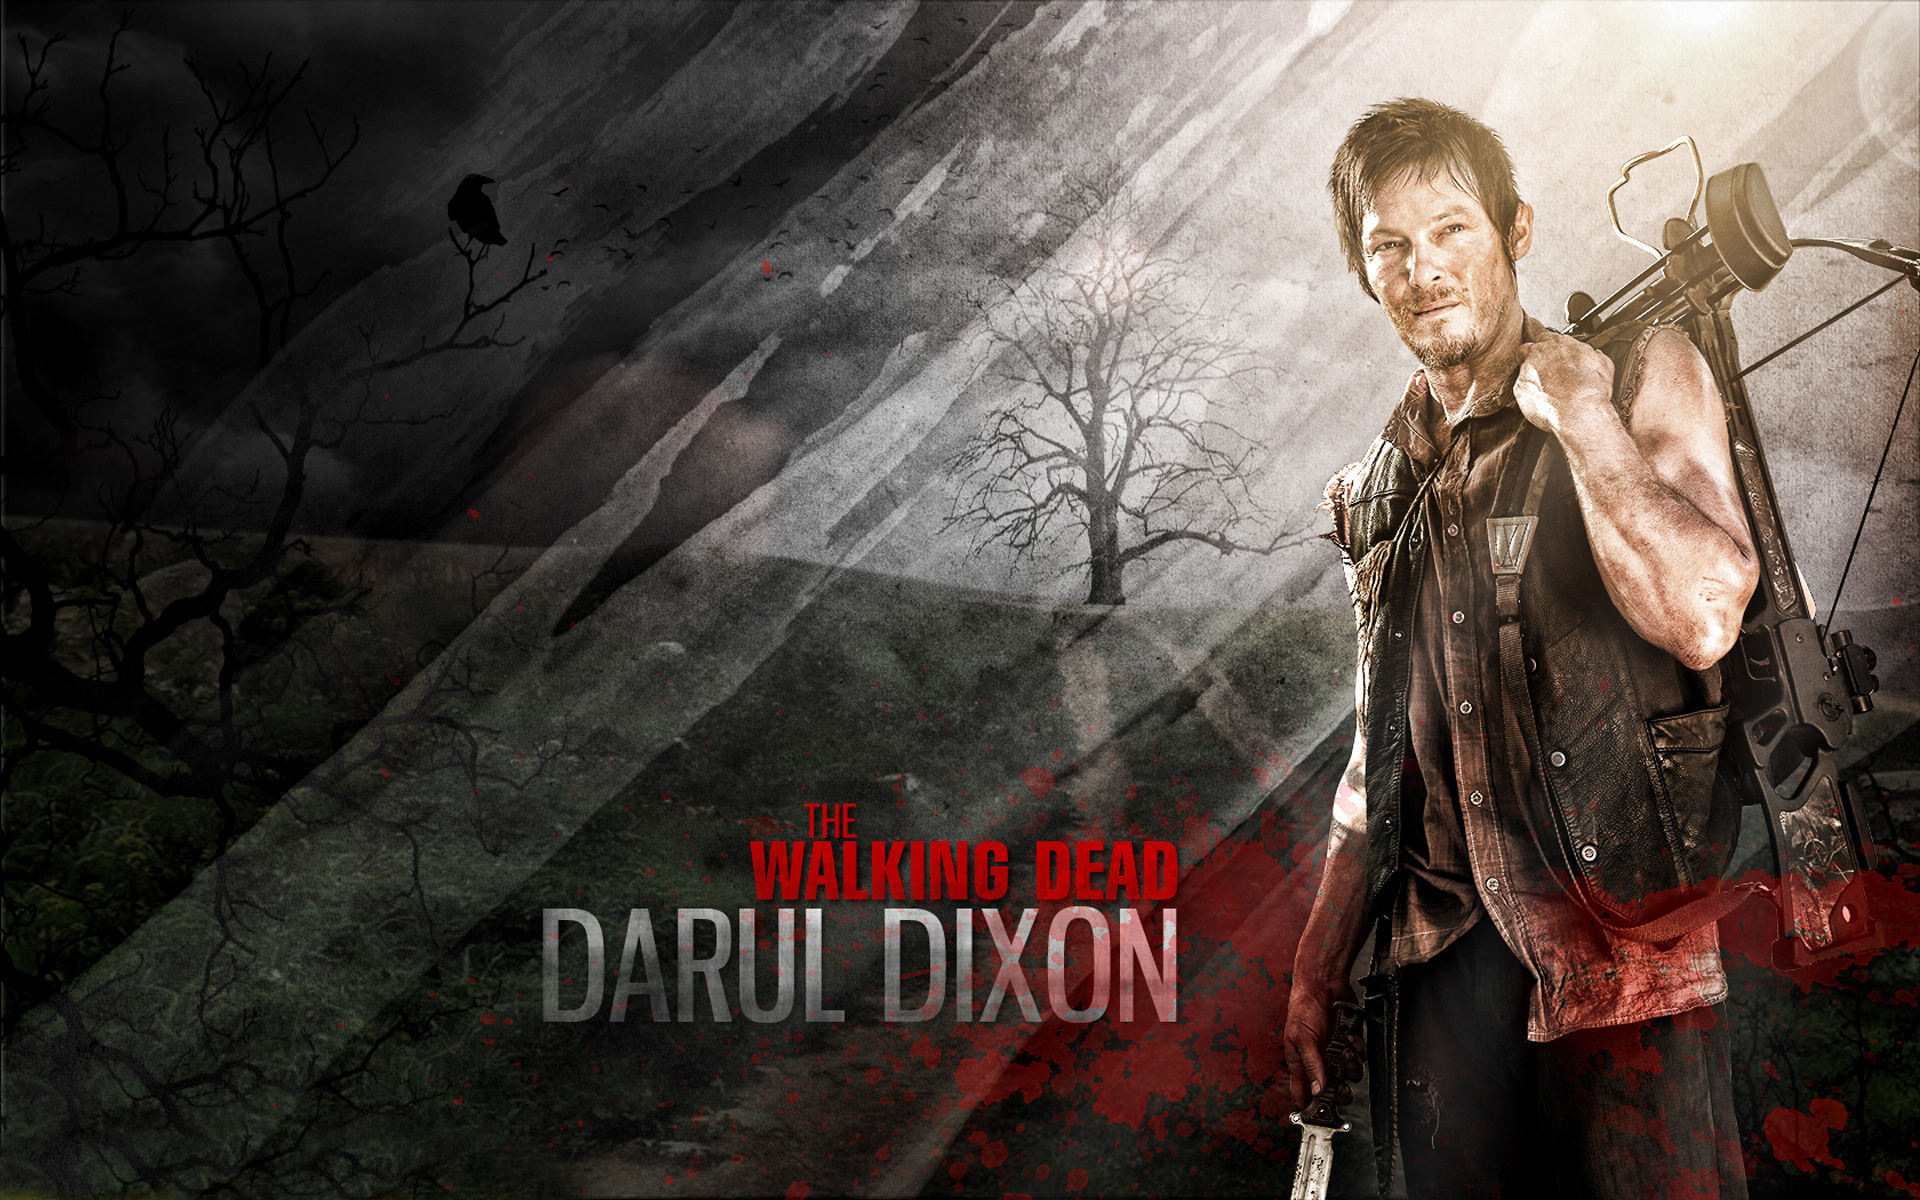 the walking dead wallpapers55com   Best Wallpapers for PCs Laptops